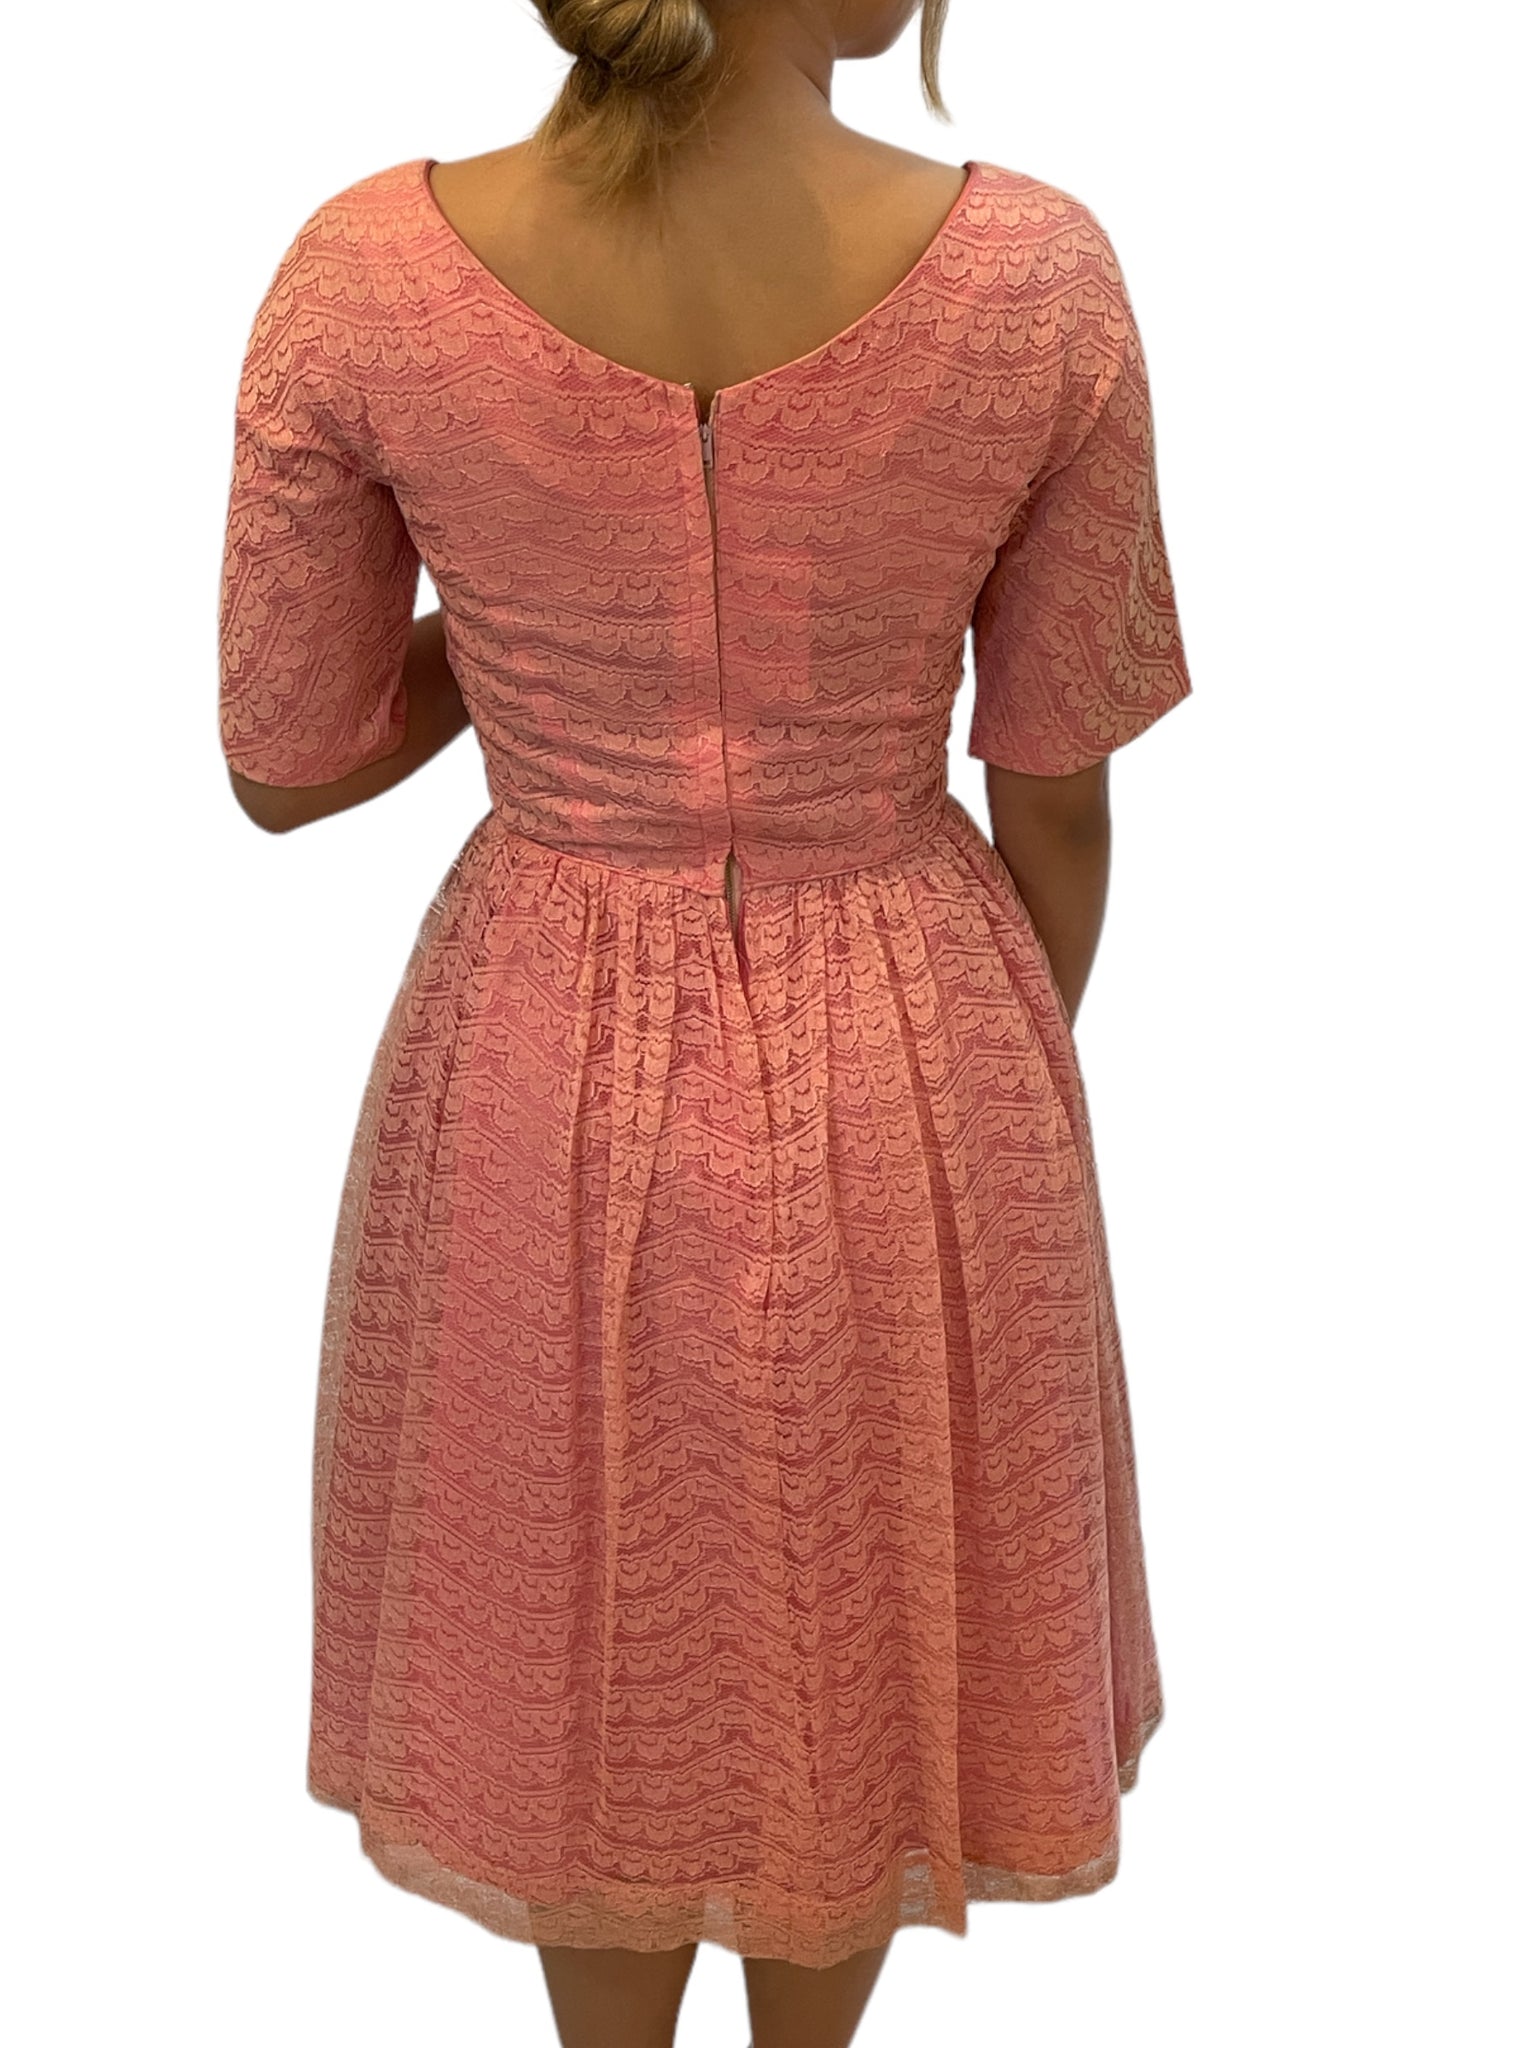 1950s Fit Flare Pink Lace 3/4 Sleeve